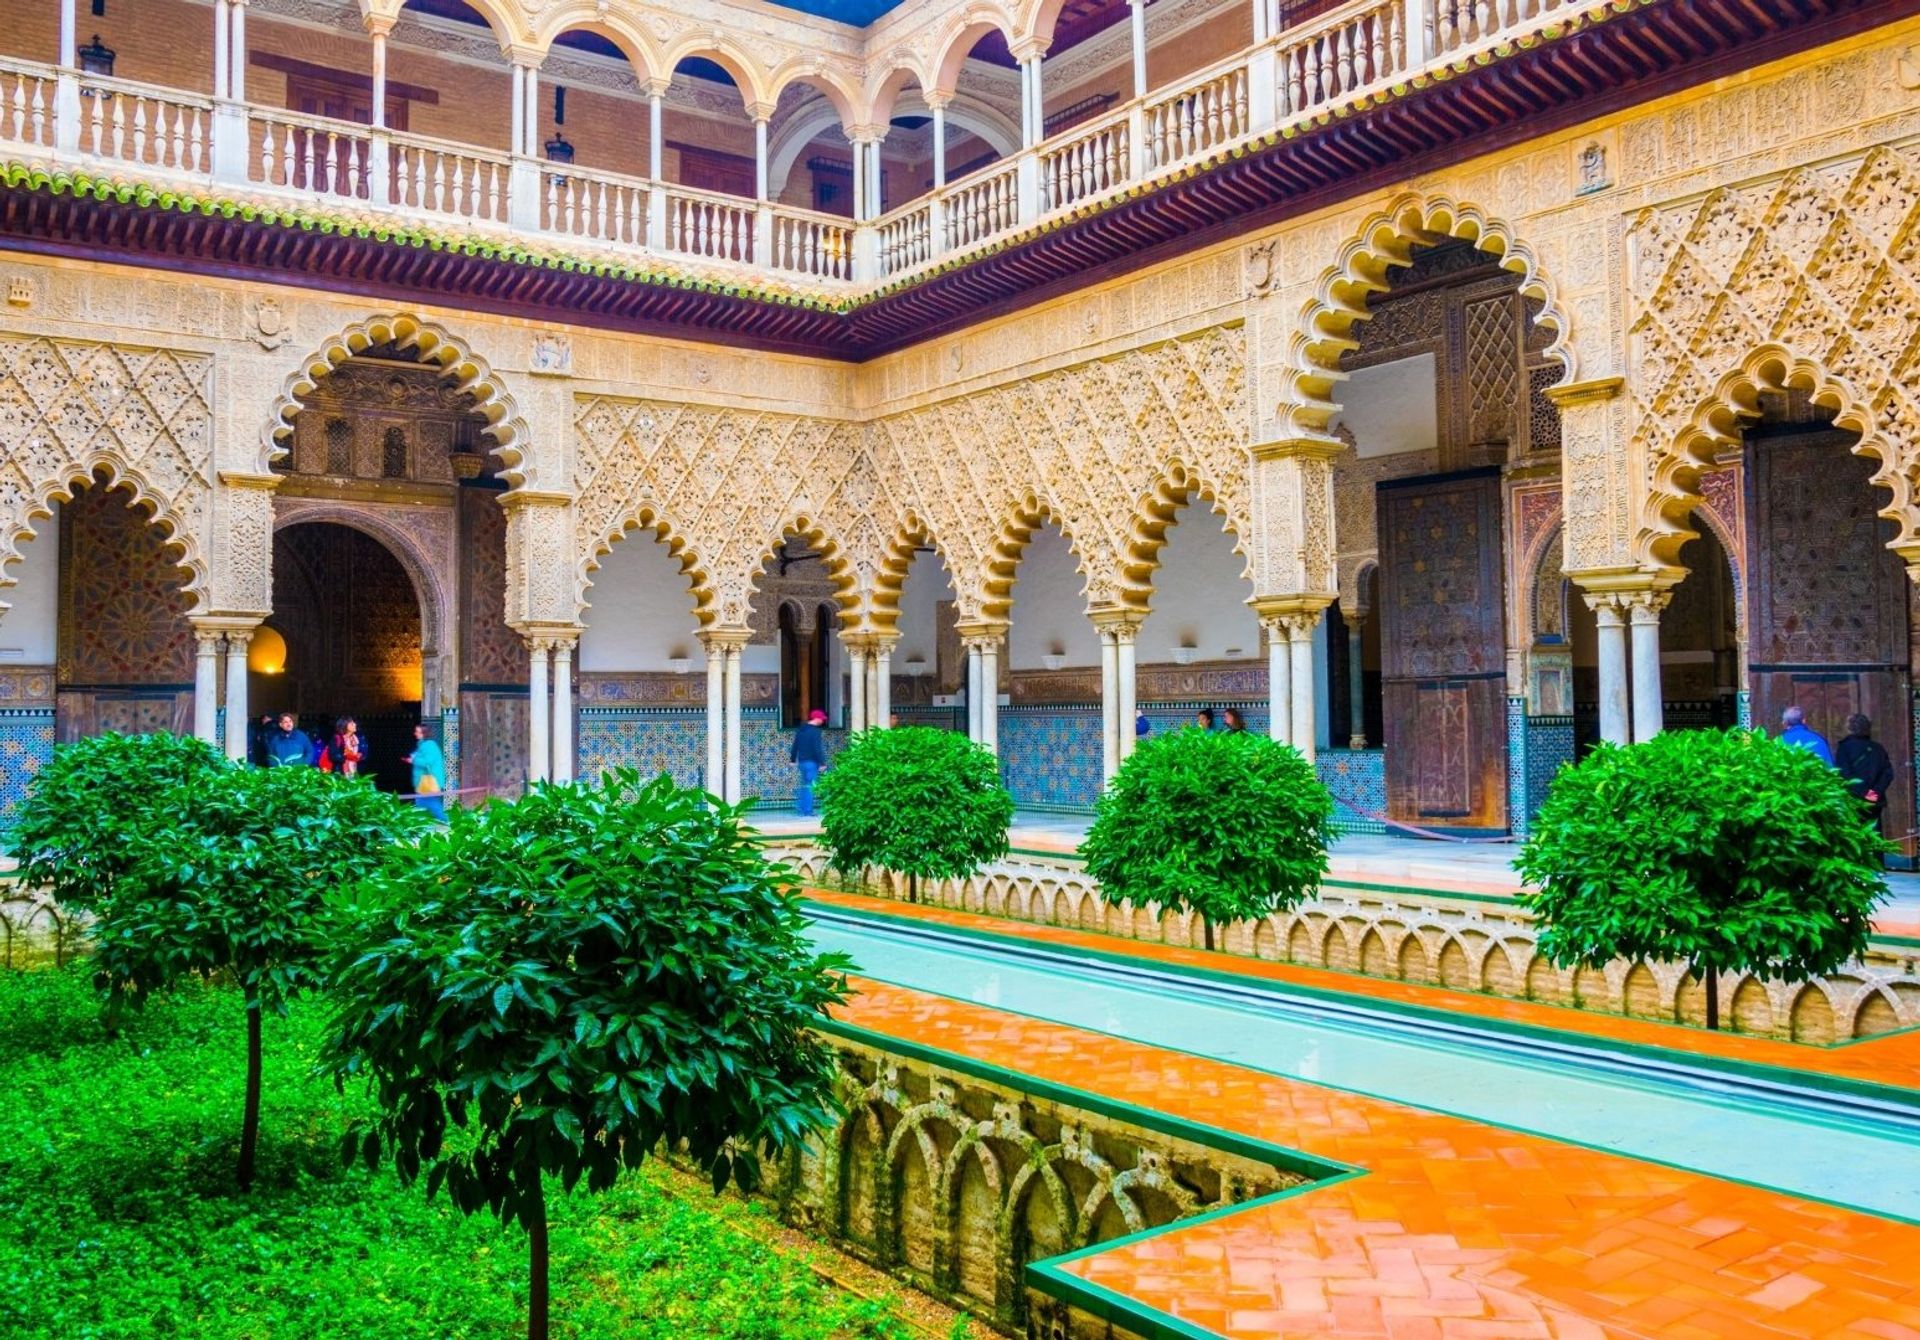 The monumental Alcazar in Seville was declared a World Heritage Site by UNESCO in 1987